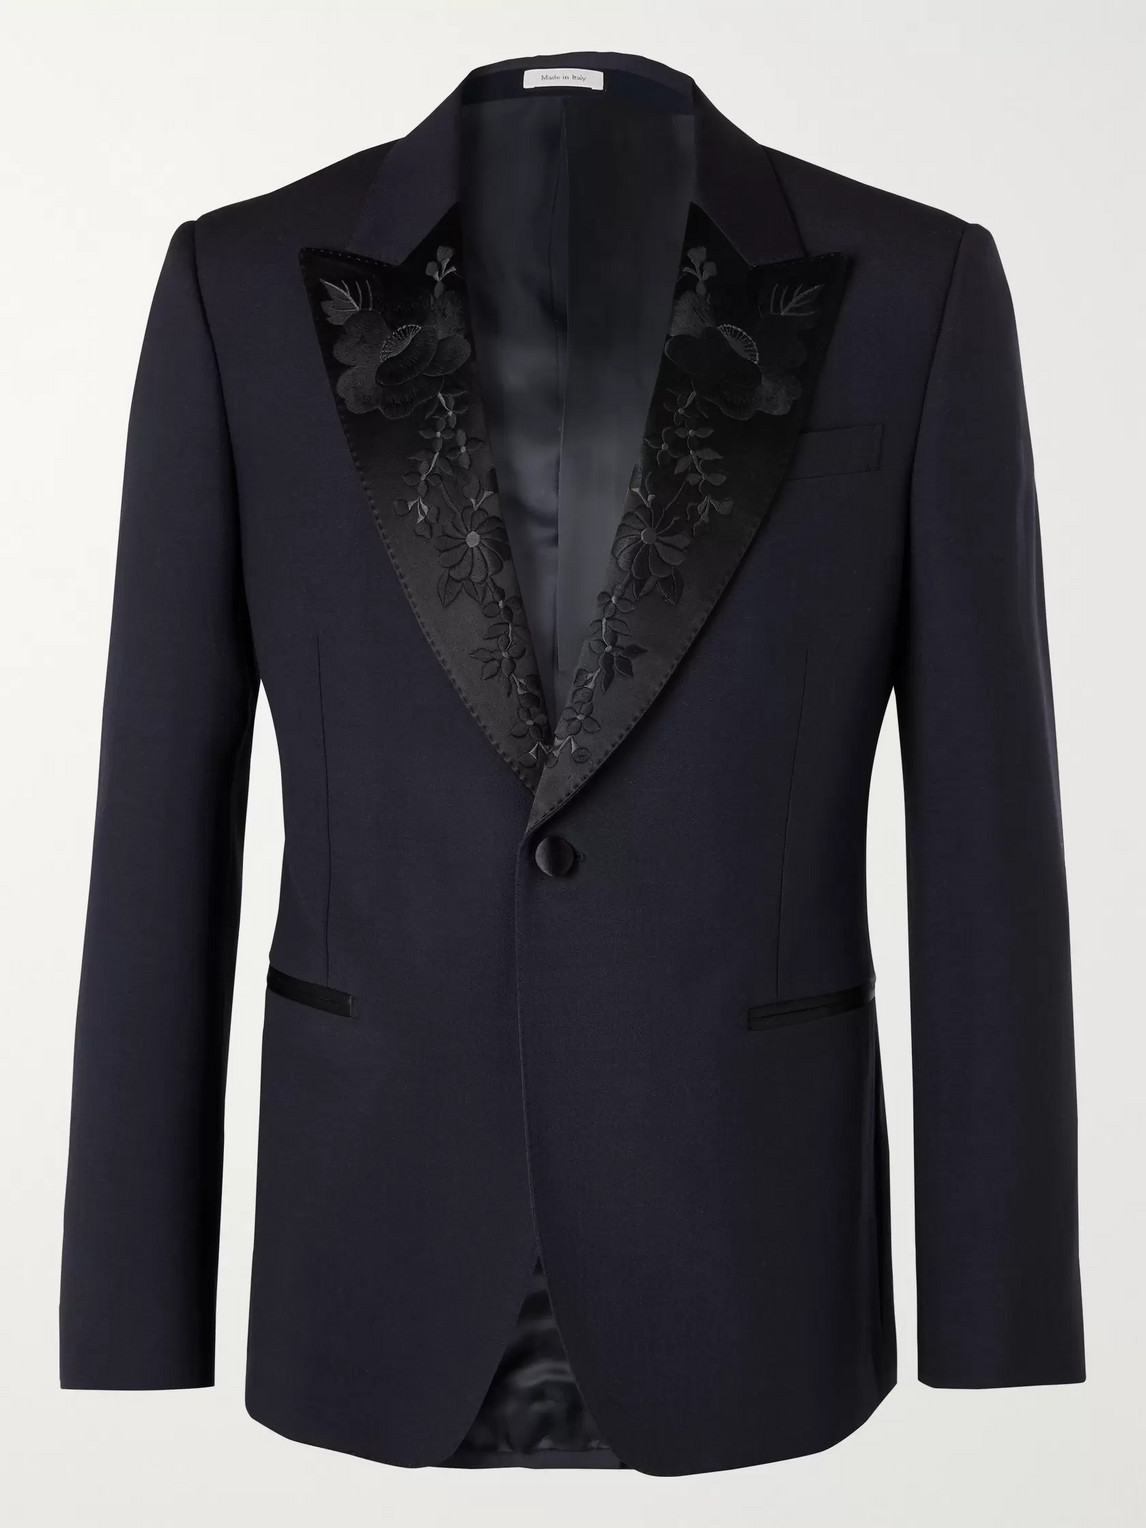 ALEXANDER MCQUEEN NAVY SLIM-FIT SILK-SATIN JACQUARD-TRIMMED WOOL AND MOHAIR-BLEND SUIT JACKET